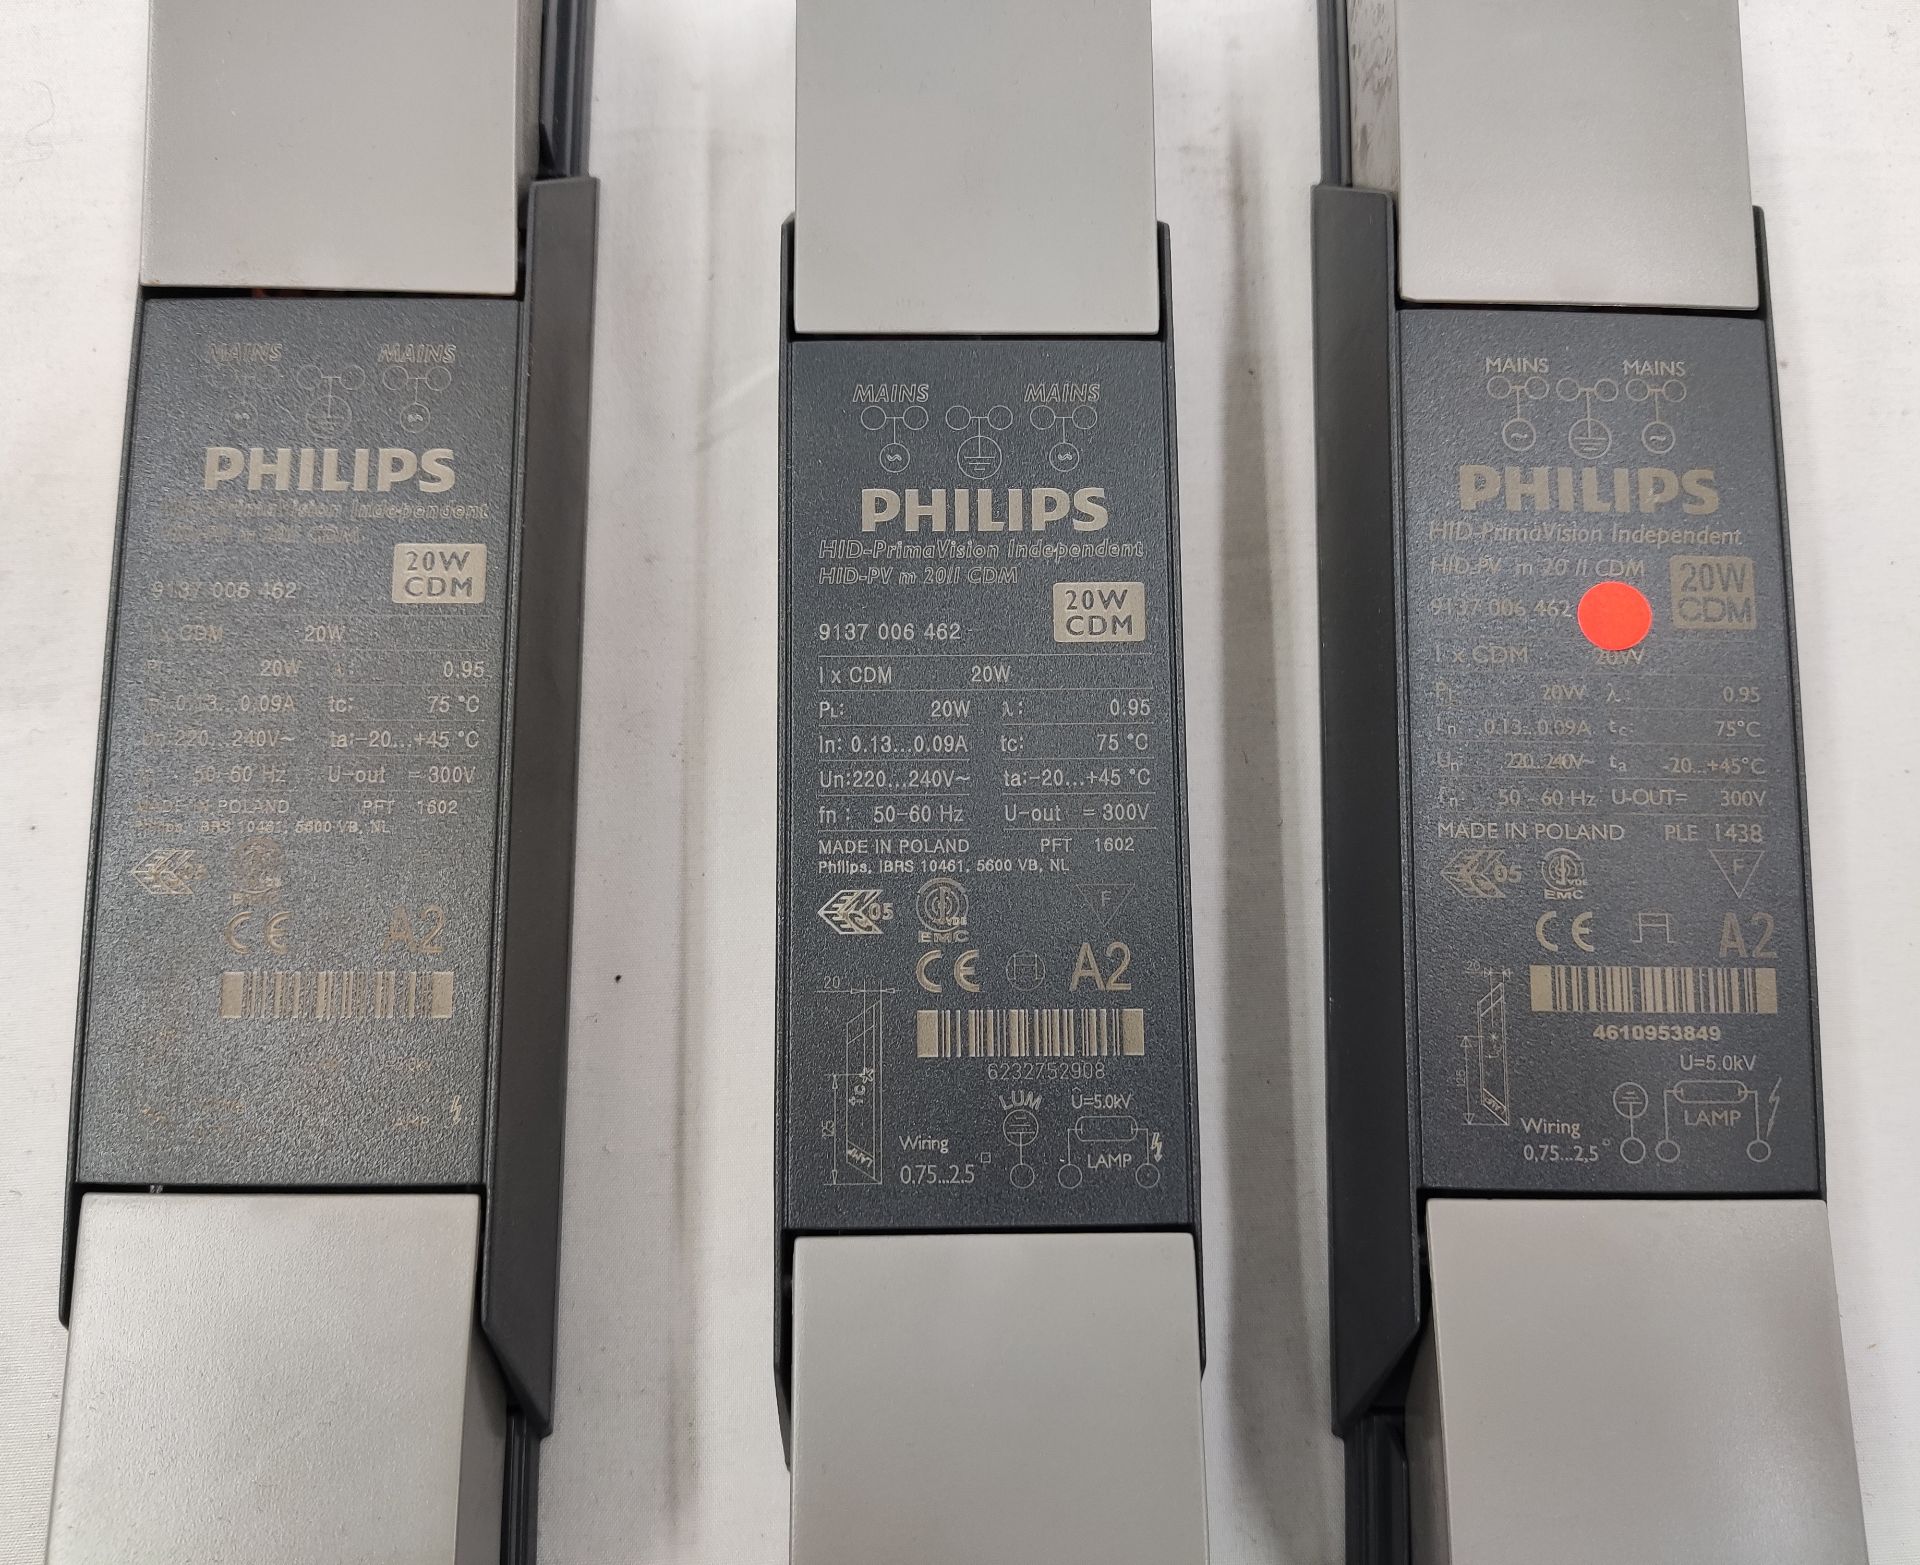 3 x PHILIPS Electronic Drivers For Hid Lamps - Hid-Pv M 20/I Cdm Hpf 220-240V 50/60Hz - Remote - Image 4 of 9